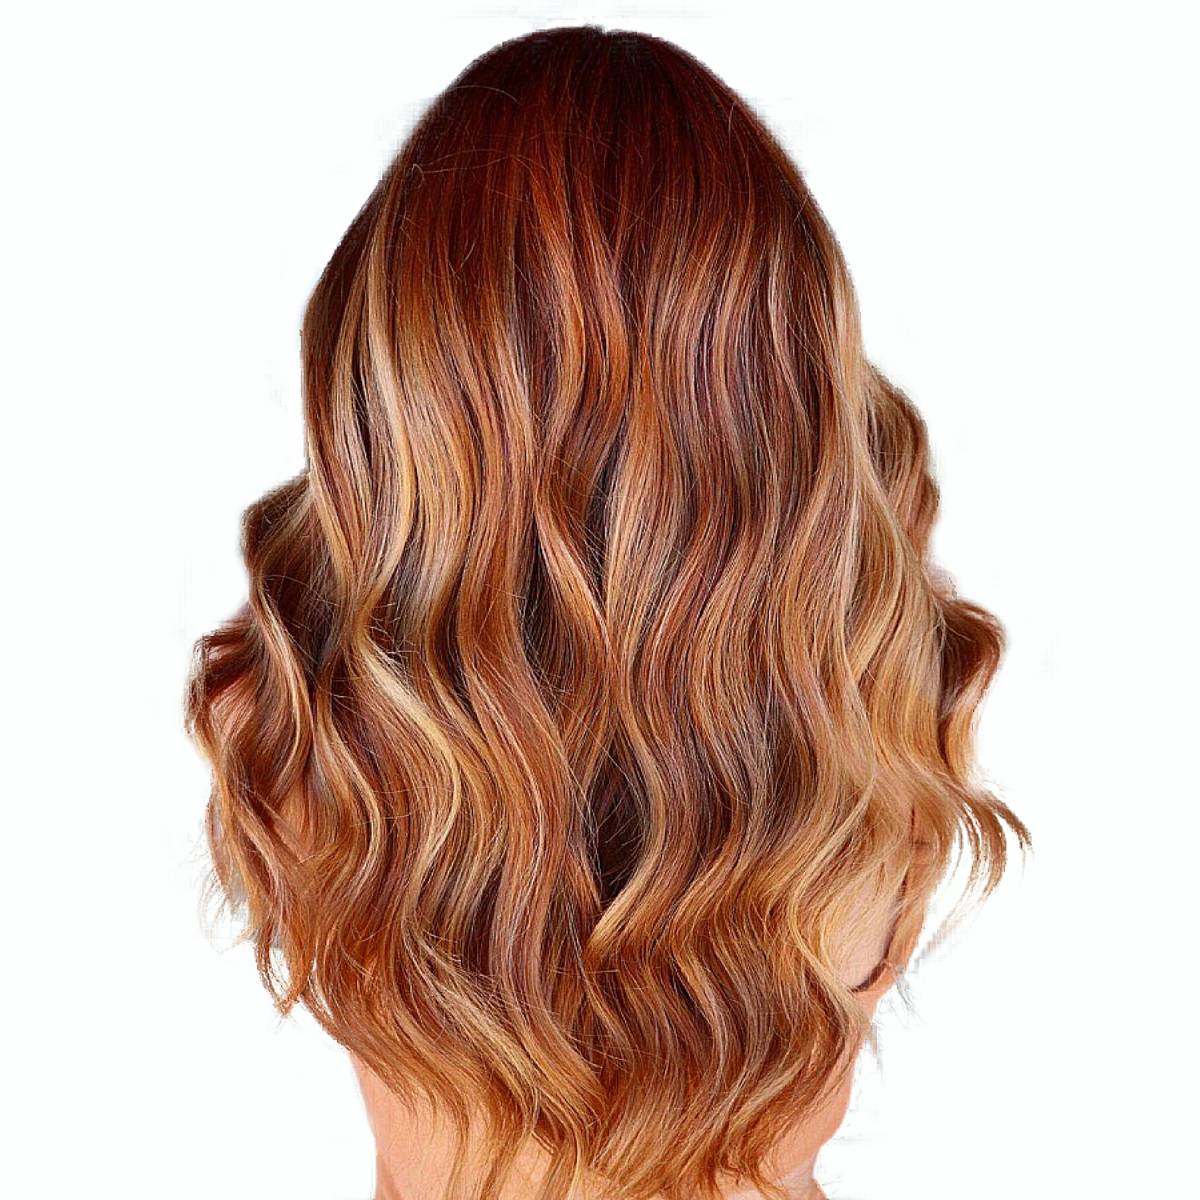 Long Middle Part Curly Natural Hair Color with Caramel Blonde